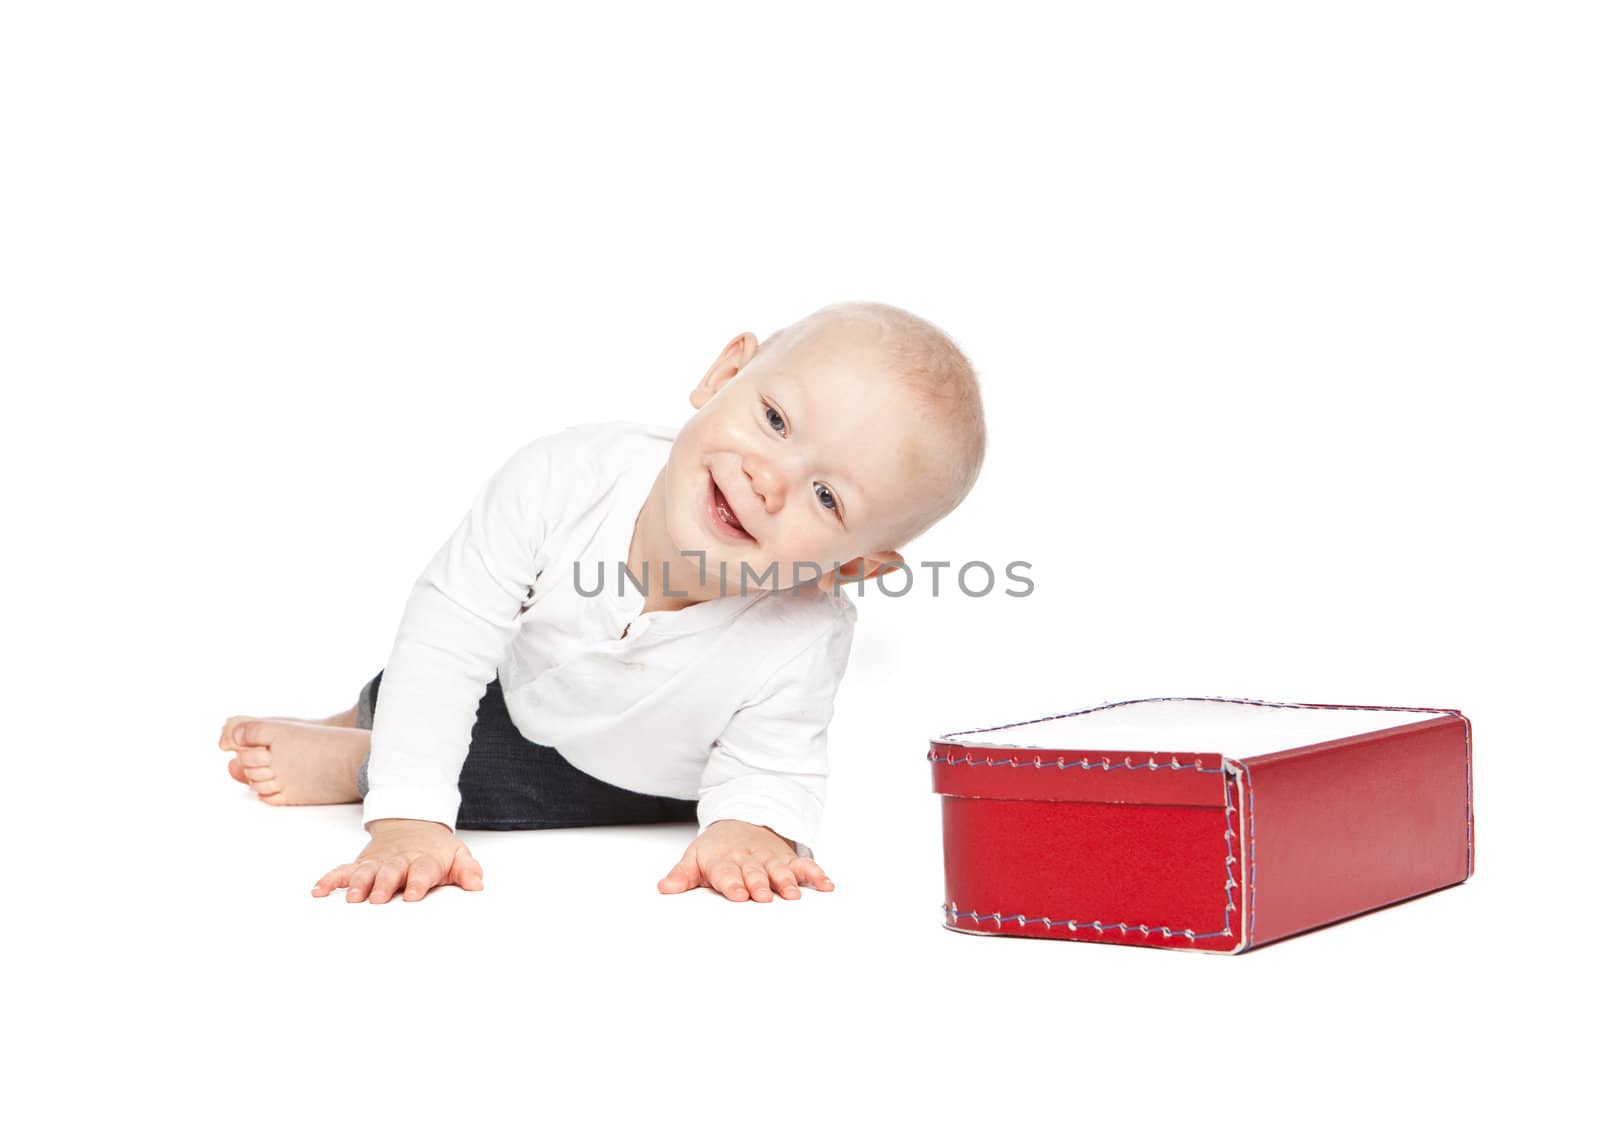 A boy and his red lunchbox by gemenacom